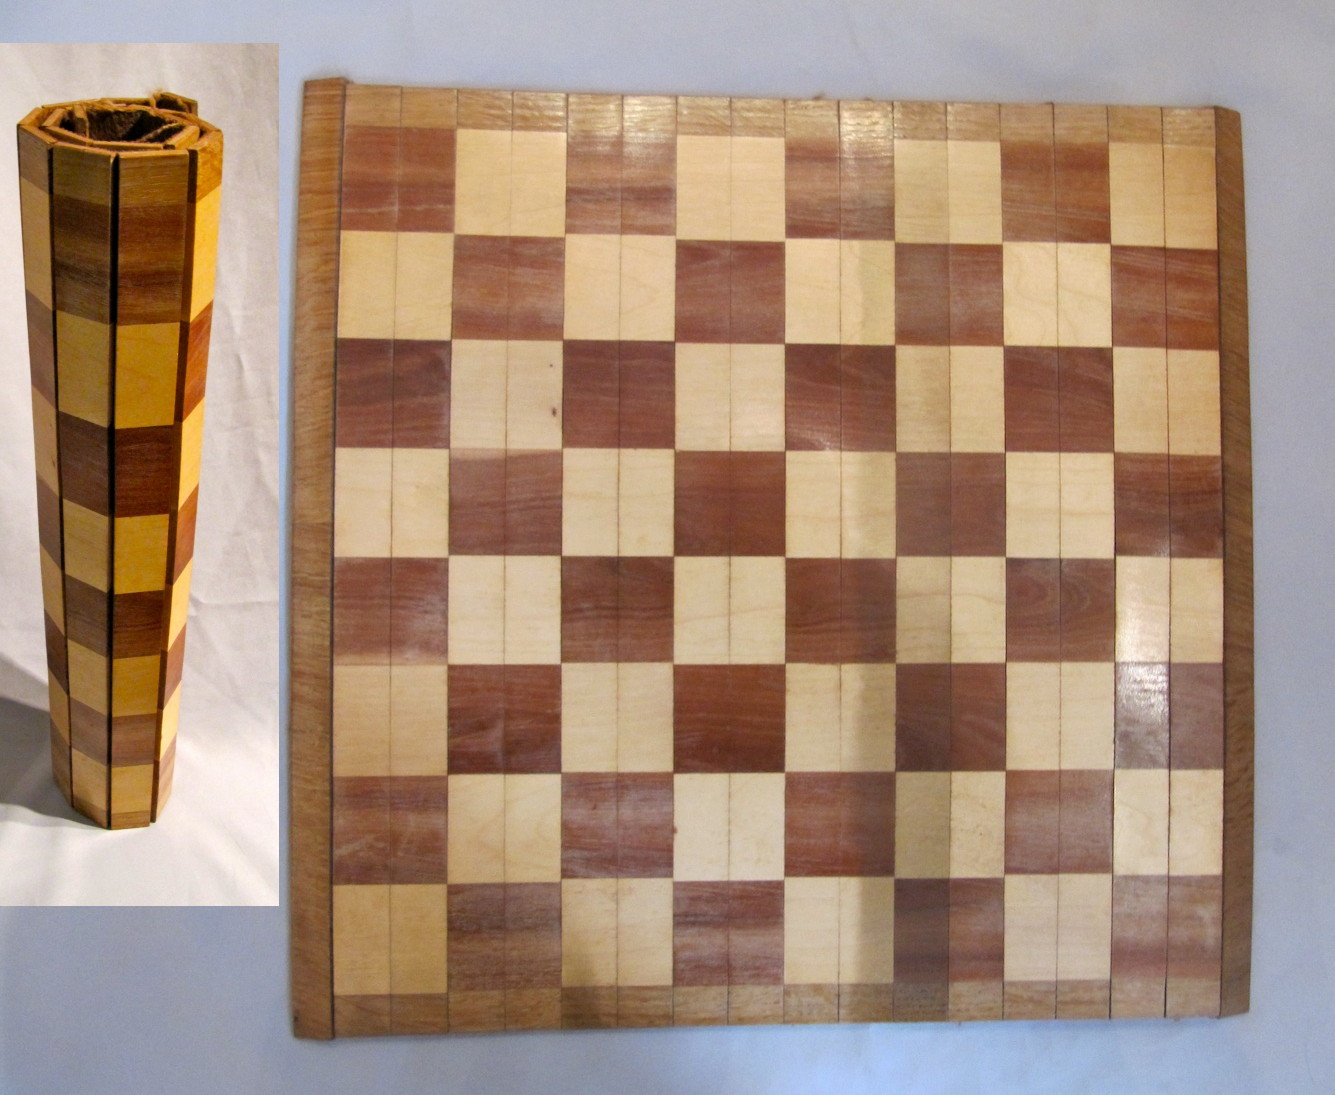 Chess Board Inlaid Wooden Flat Board Game Mahogany & Maple 